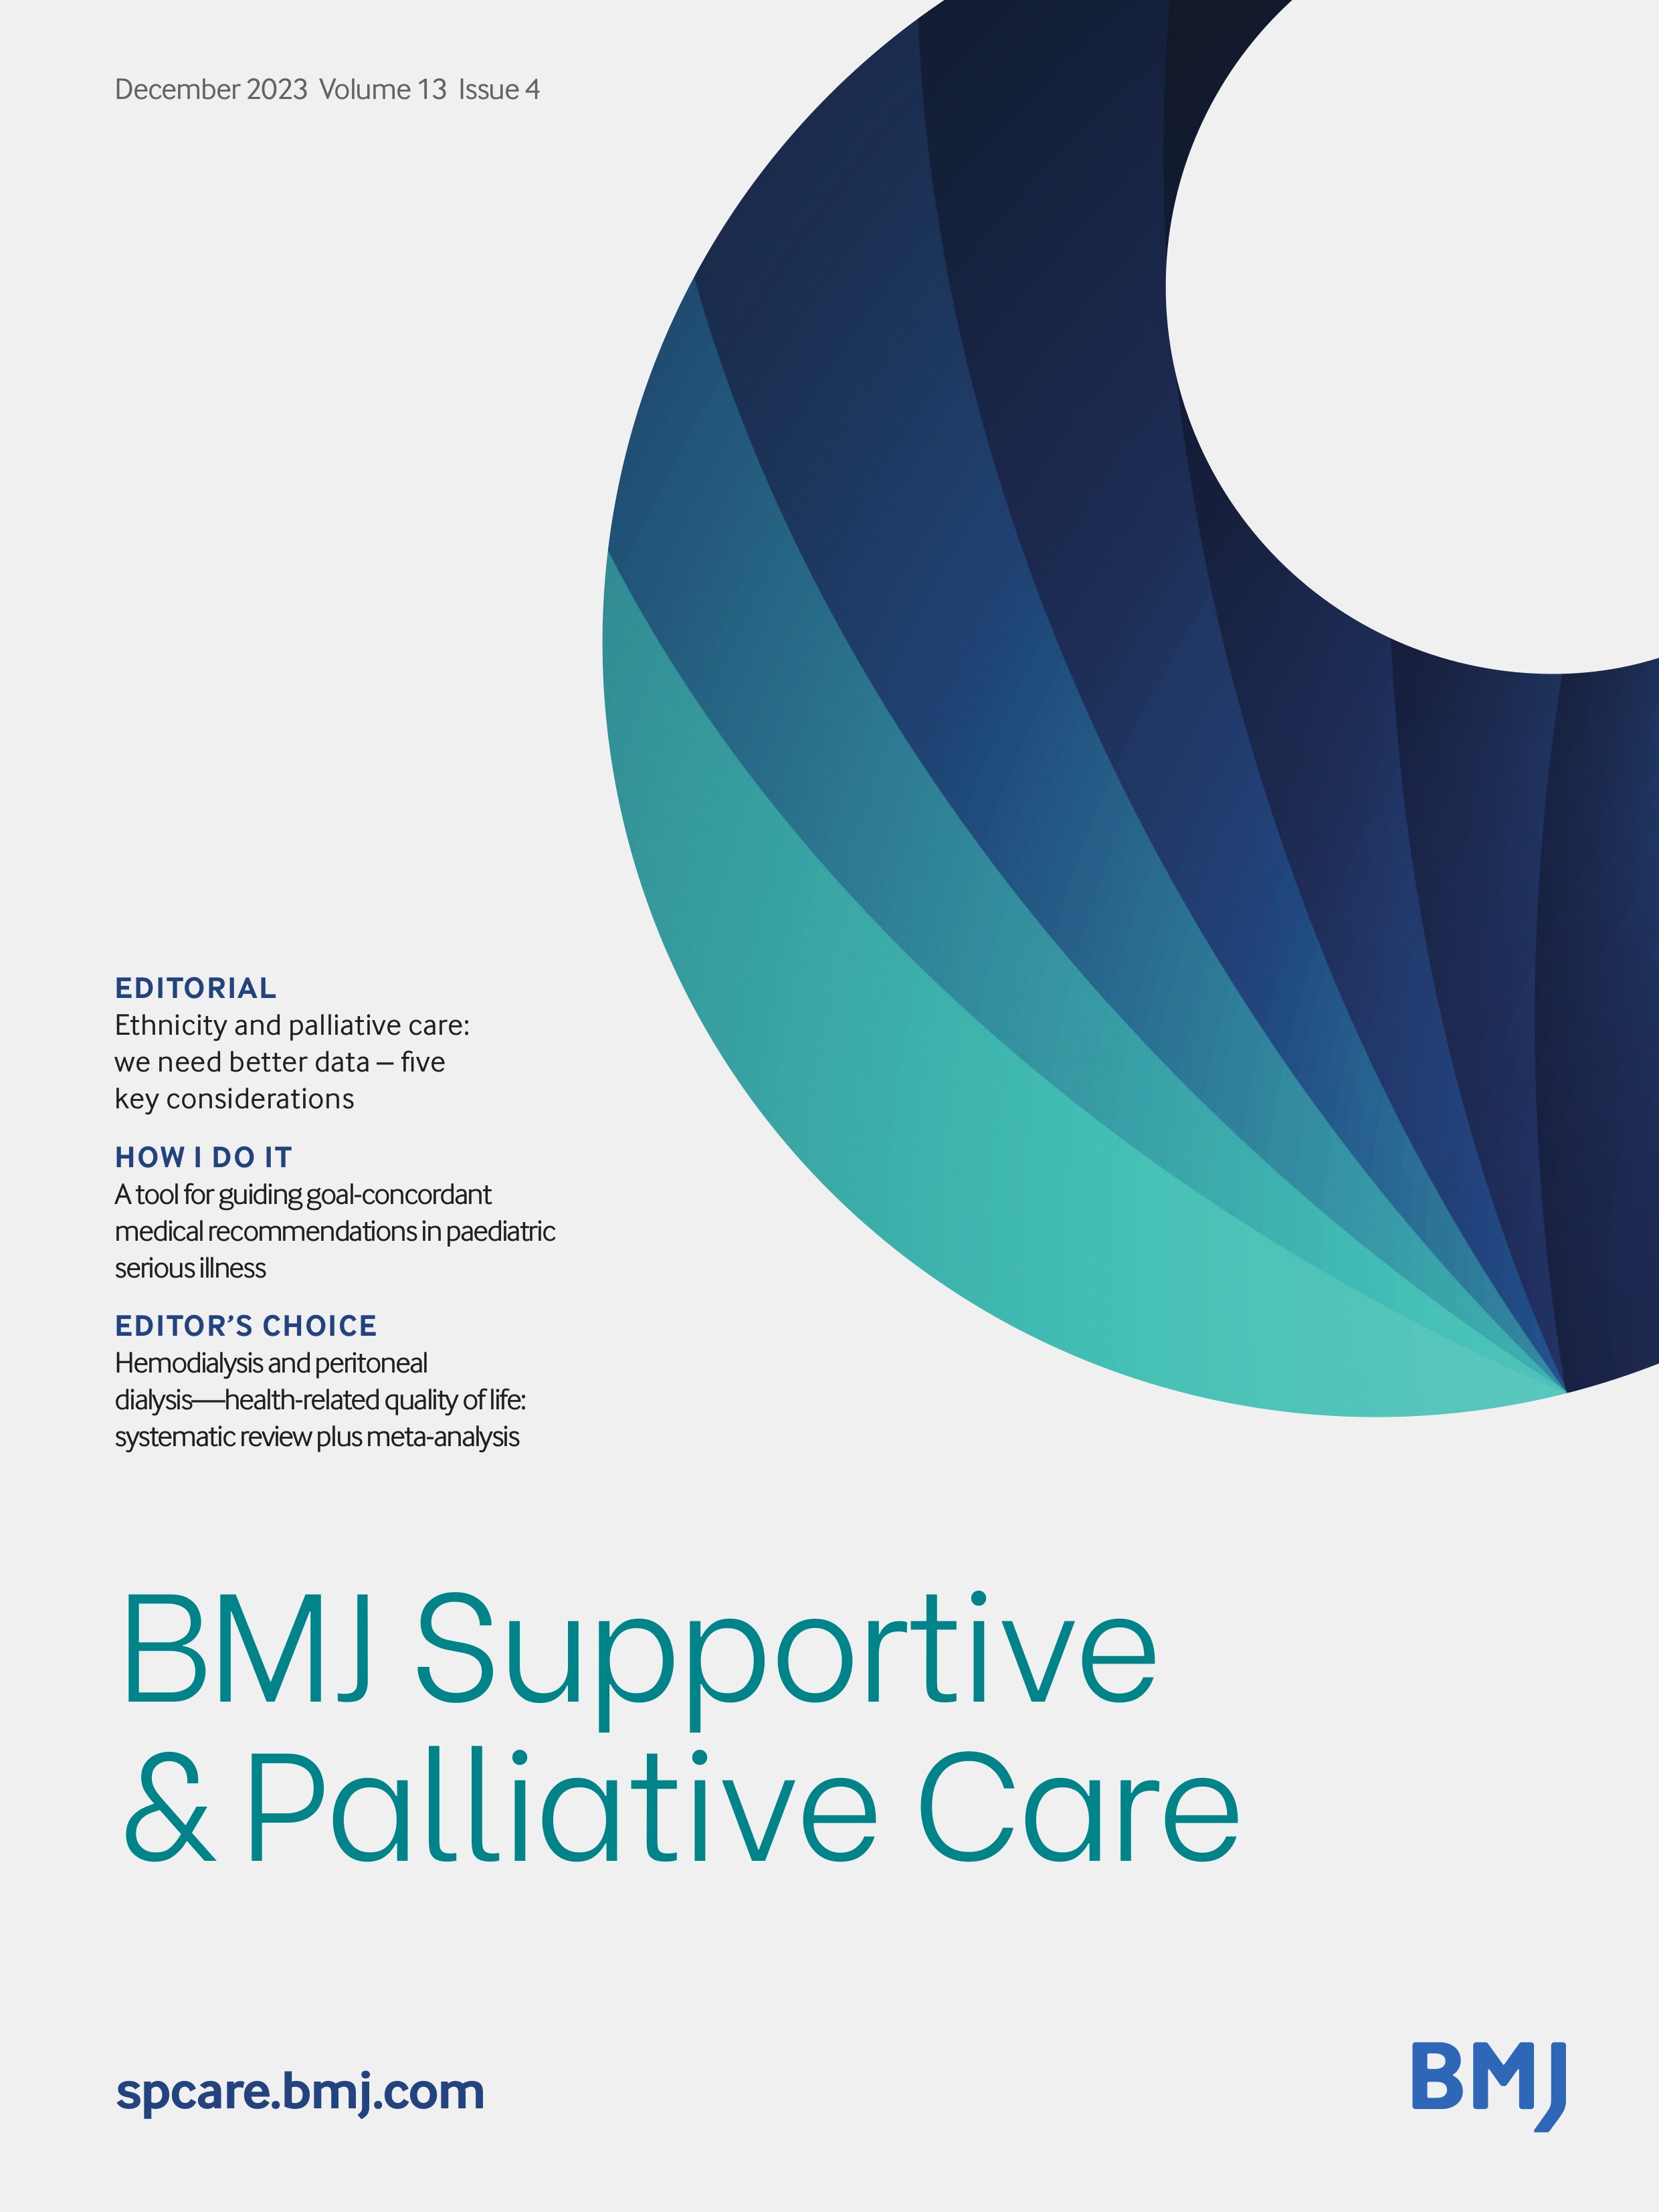 Palliative care for homeless and vulnerably housed people: scoping review and thematic synthesis